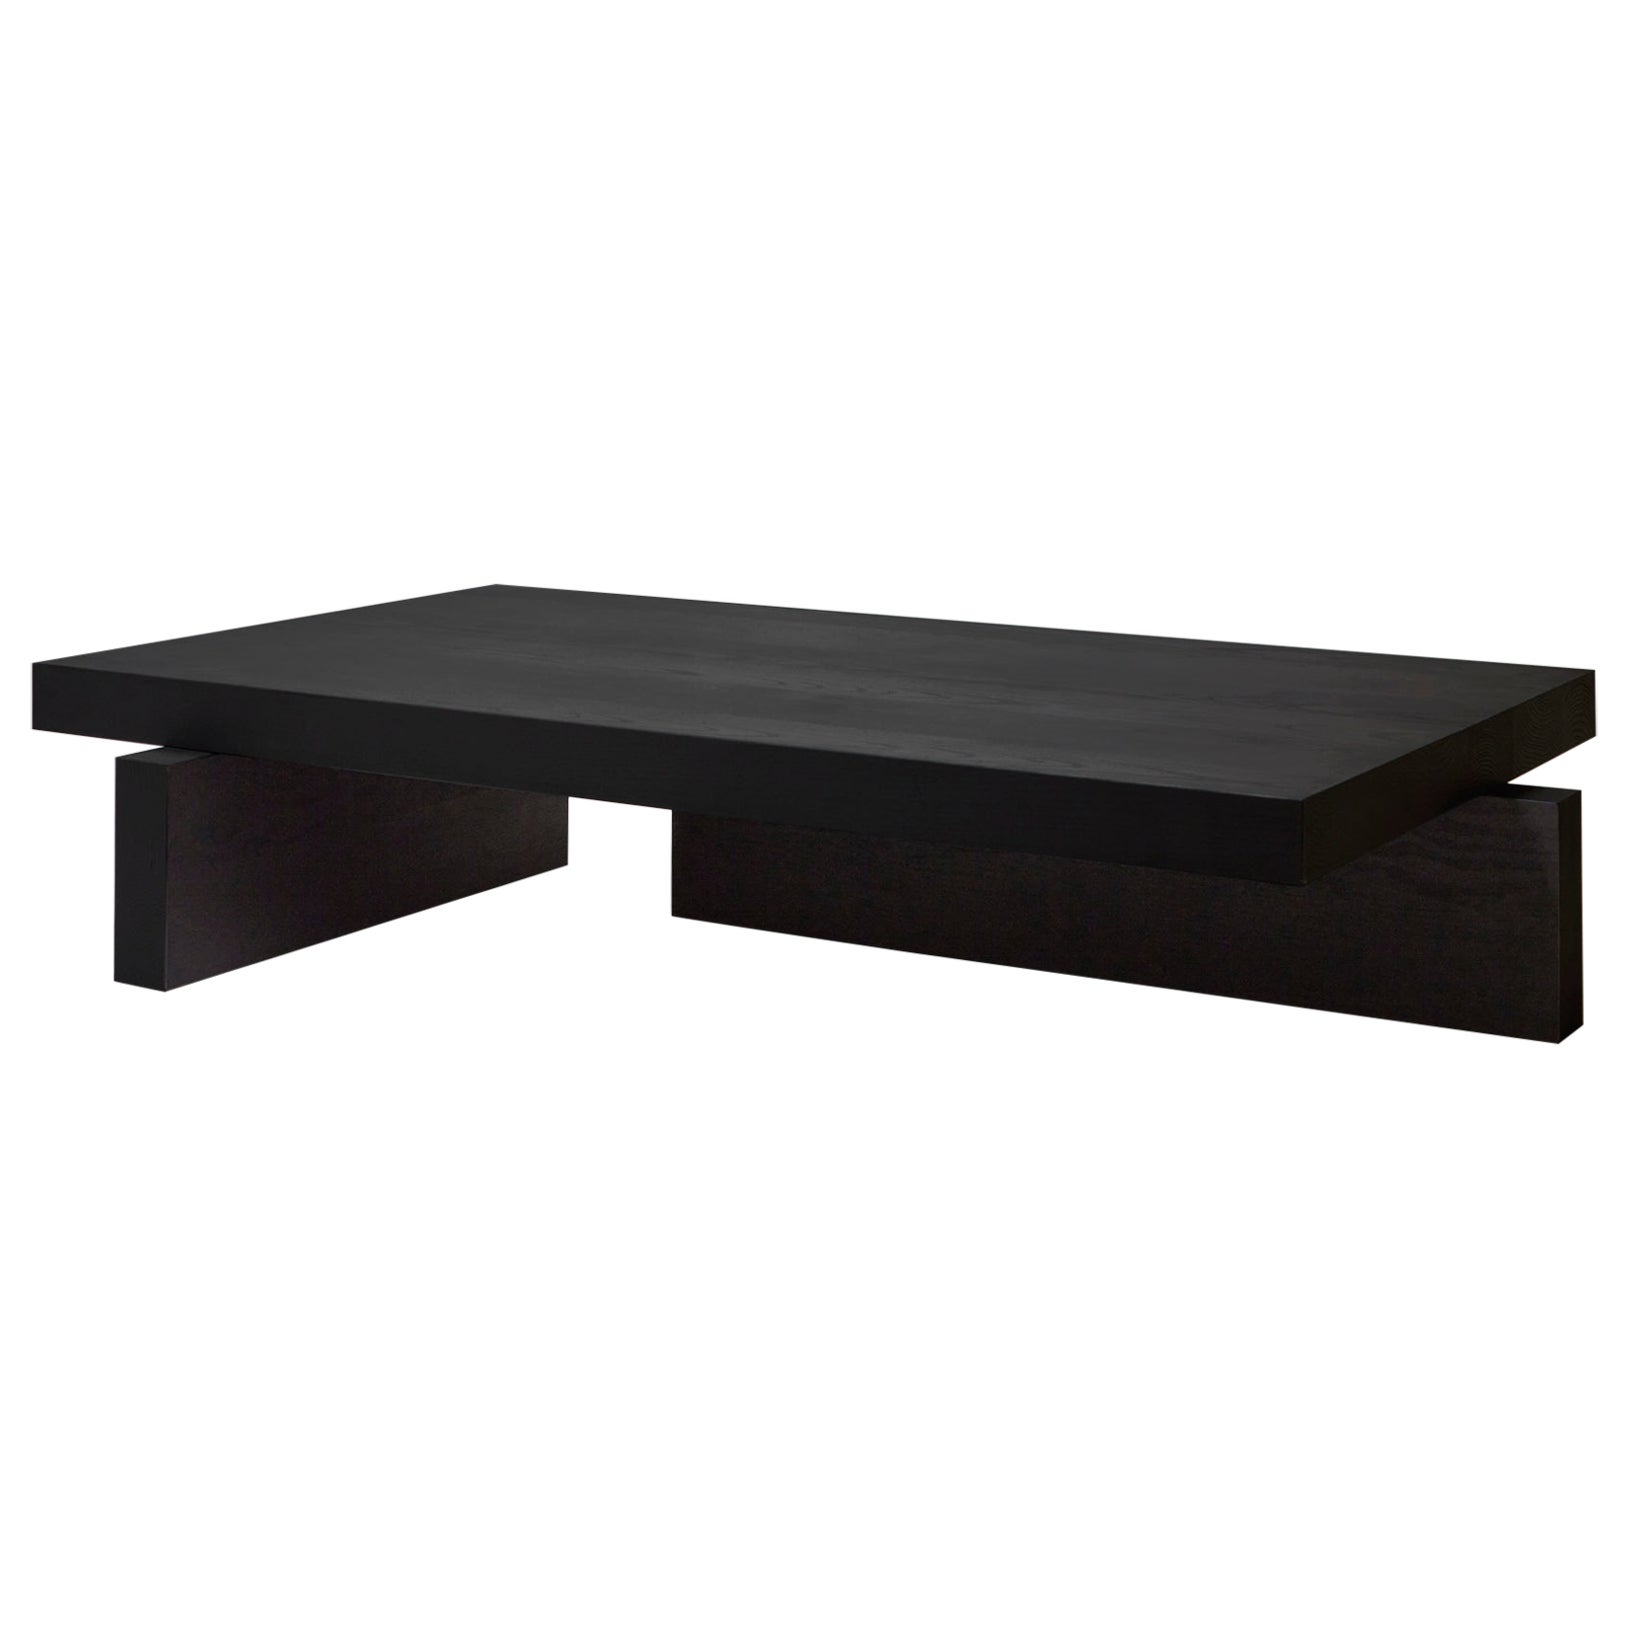 Architectural Solid Oak Wooden Hari Coffee Table For Sale